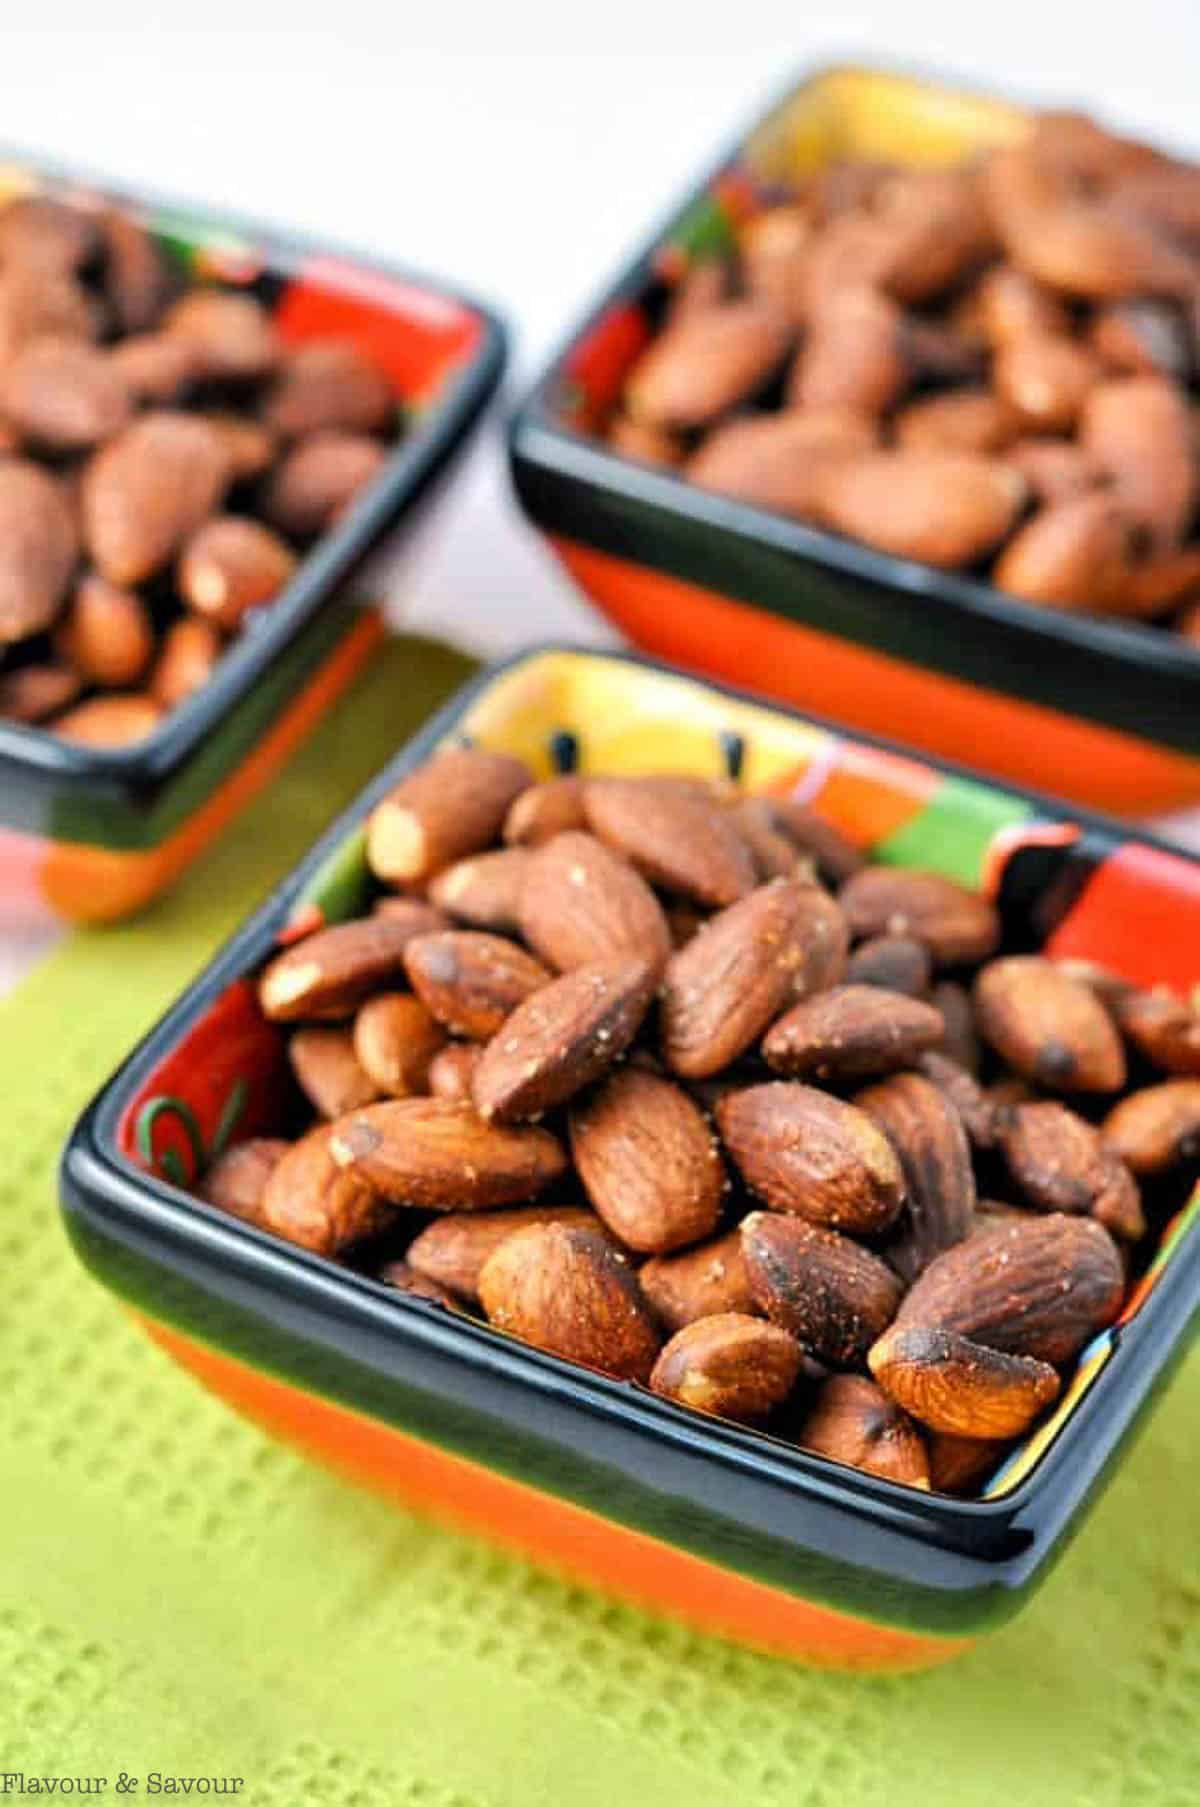 Small square bowls of Spanish spiced almonds.